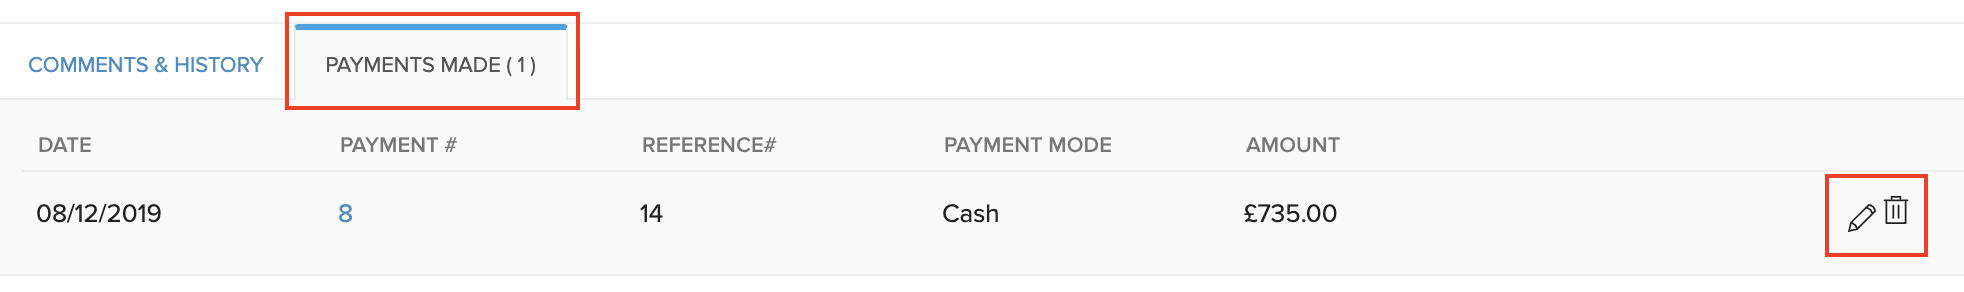 Payments Made Actions